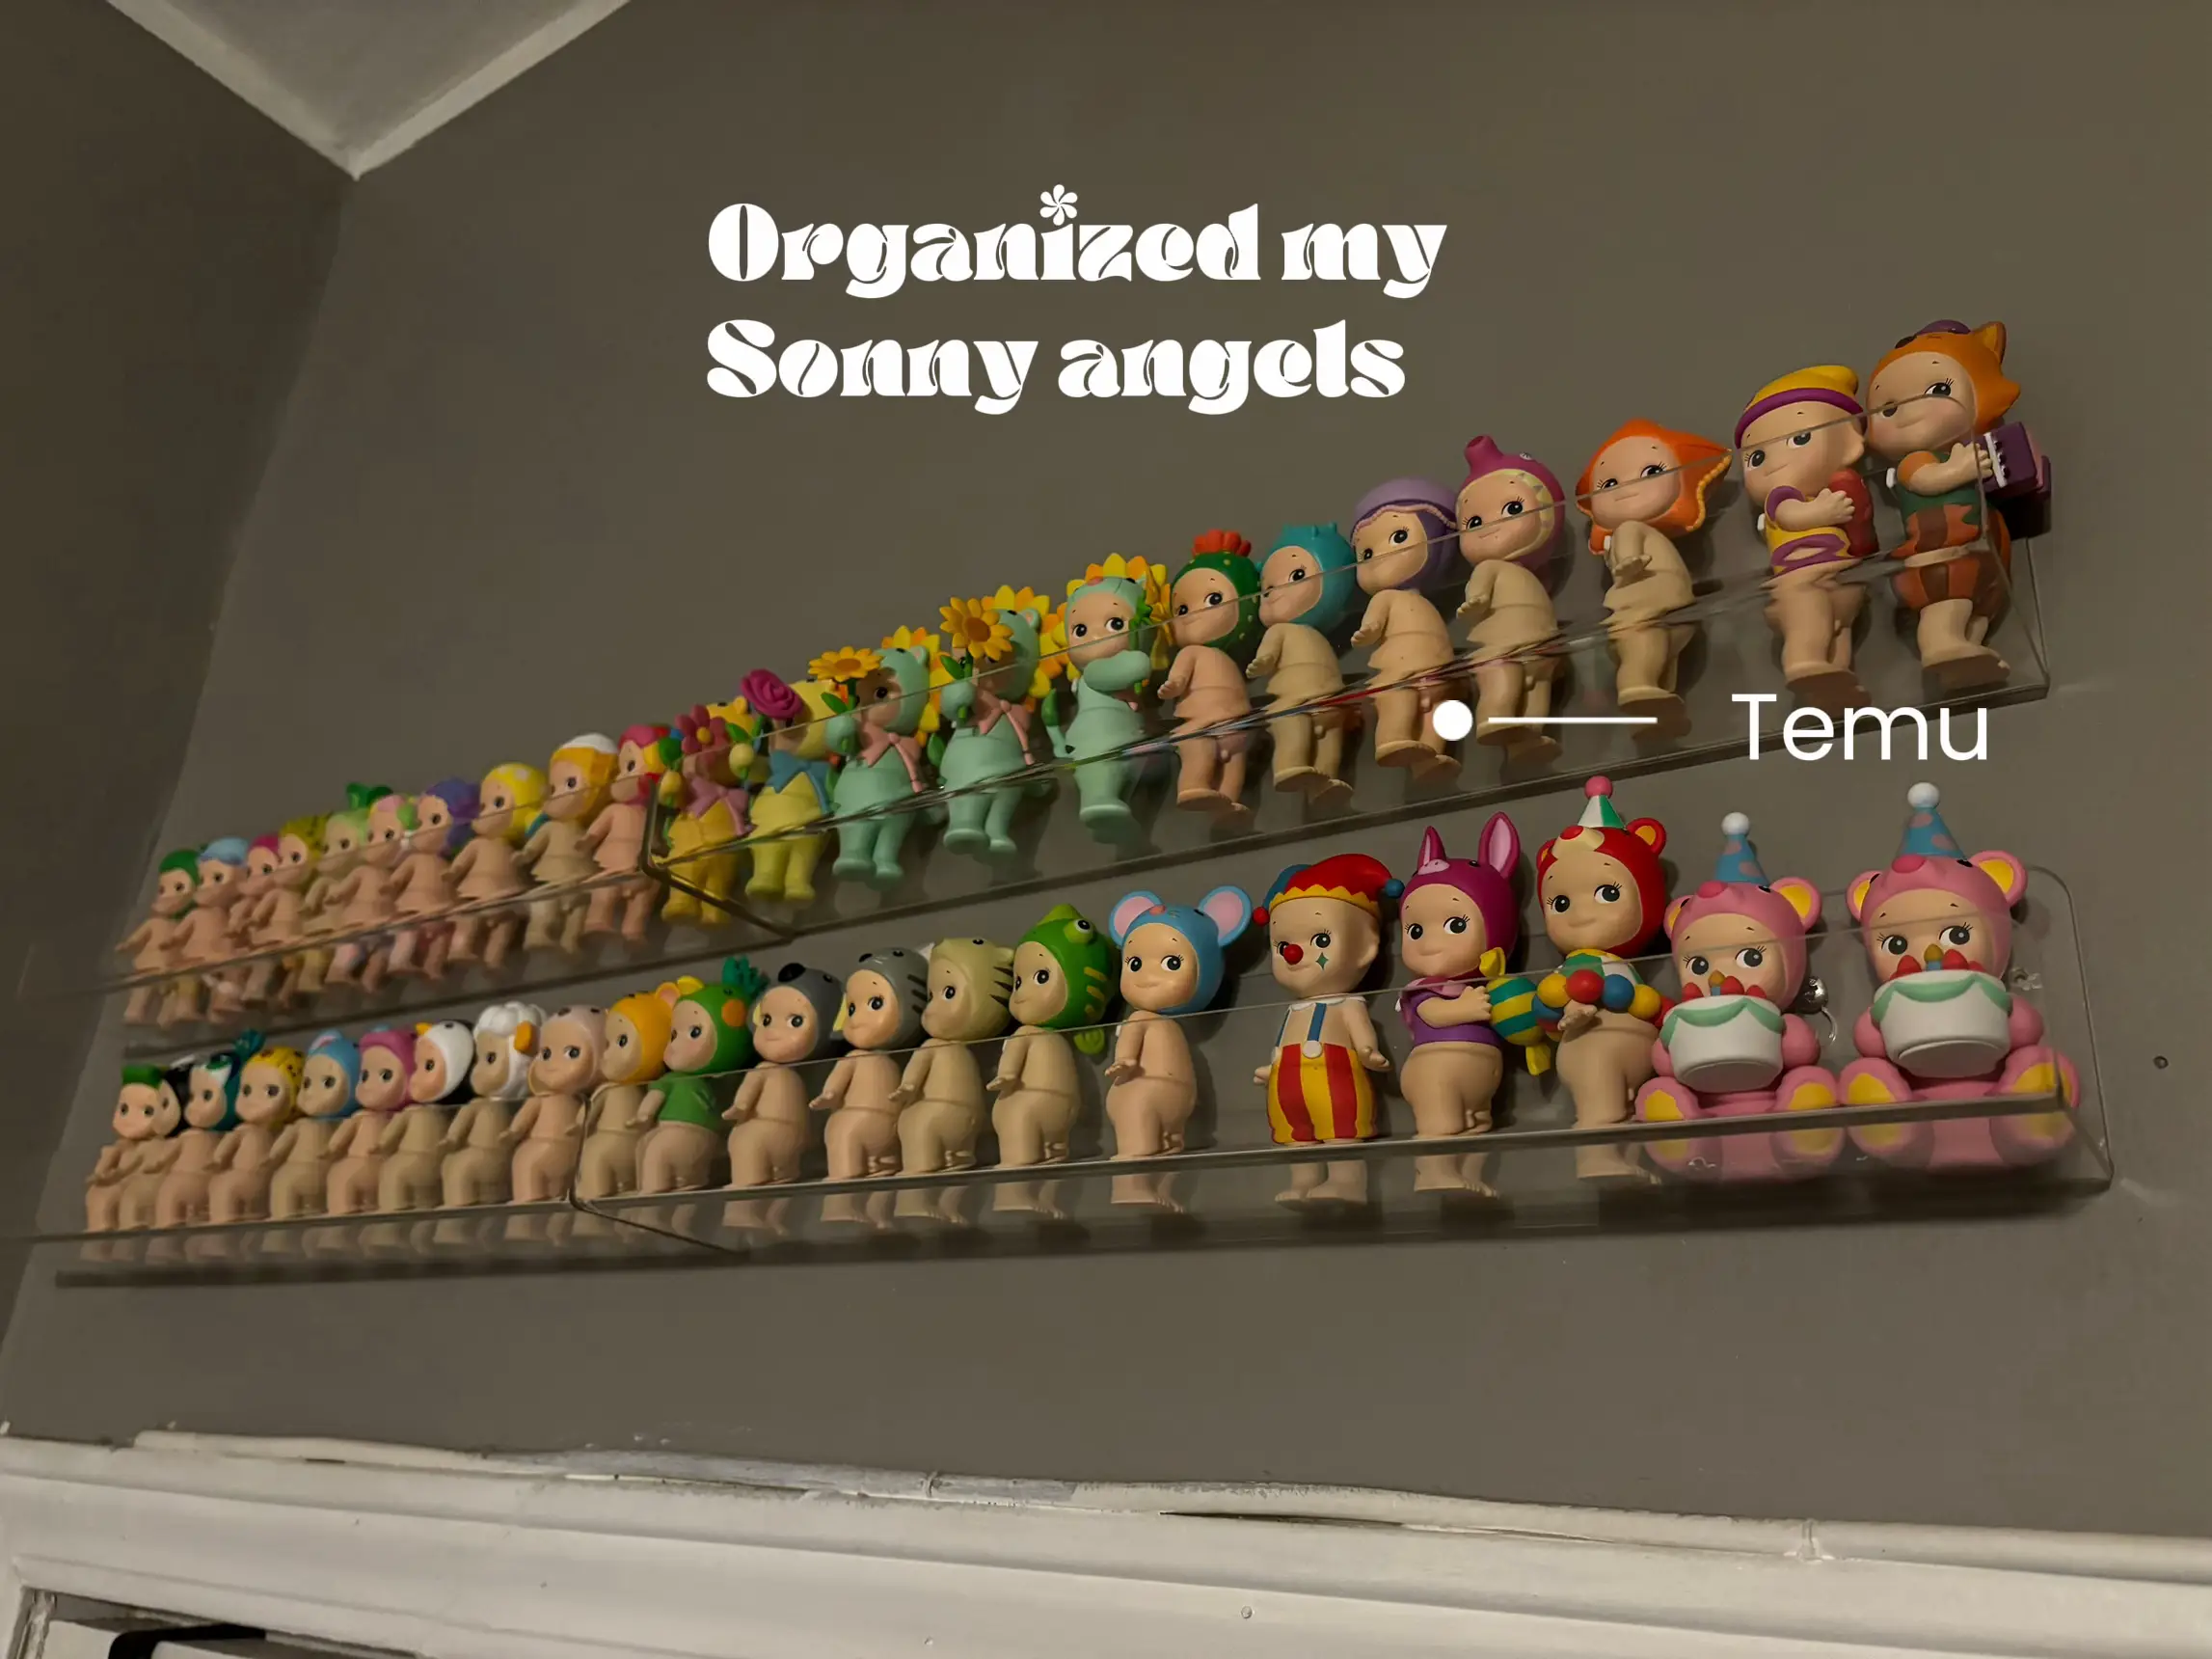 Sonny Angels Are the New Pokémon - PureWow